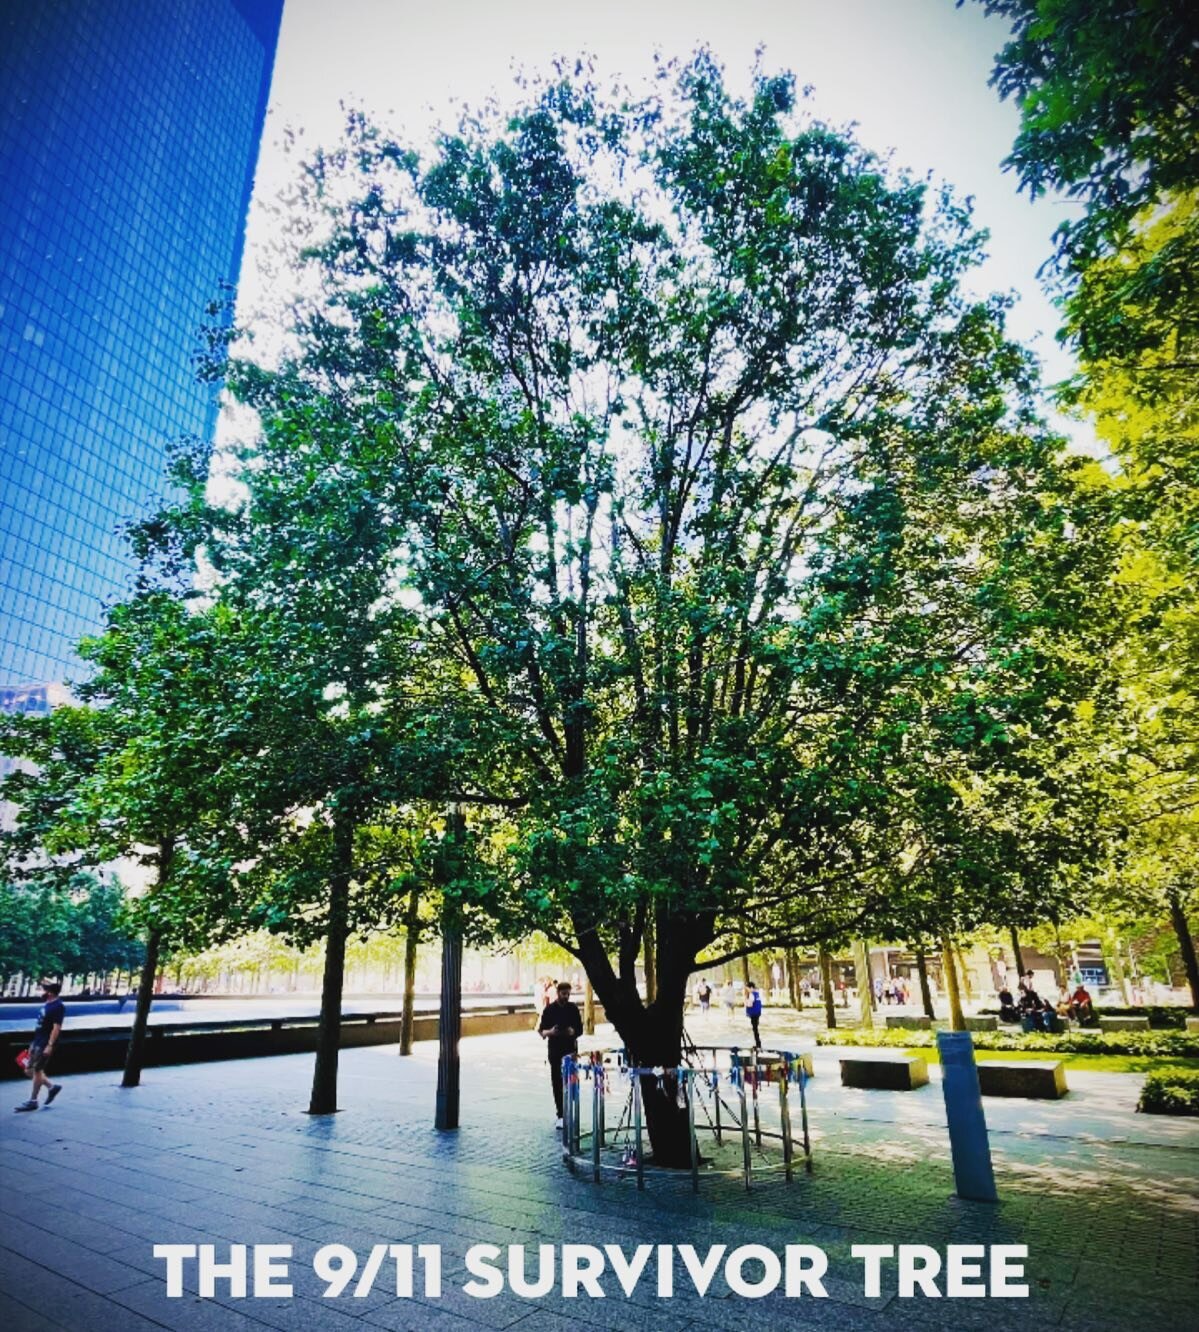 To commemorate the anniversary of Sept. 11, we share this replay of our episode that featured the 9/11 Survivor Tree, a Callery Pear tree found during the excavation of Ground Zero in NYC. 

Our guest, Ron Vega, shares his insightful and touching sto